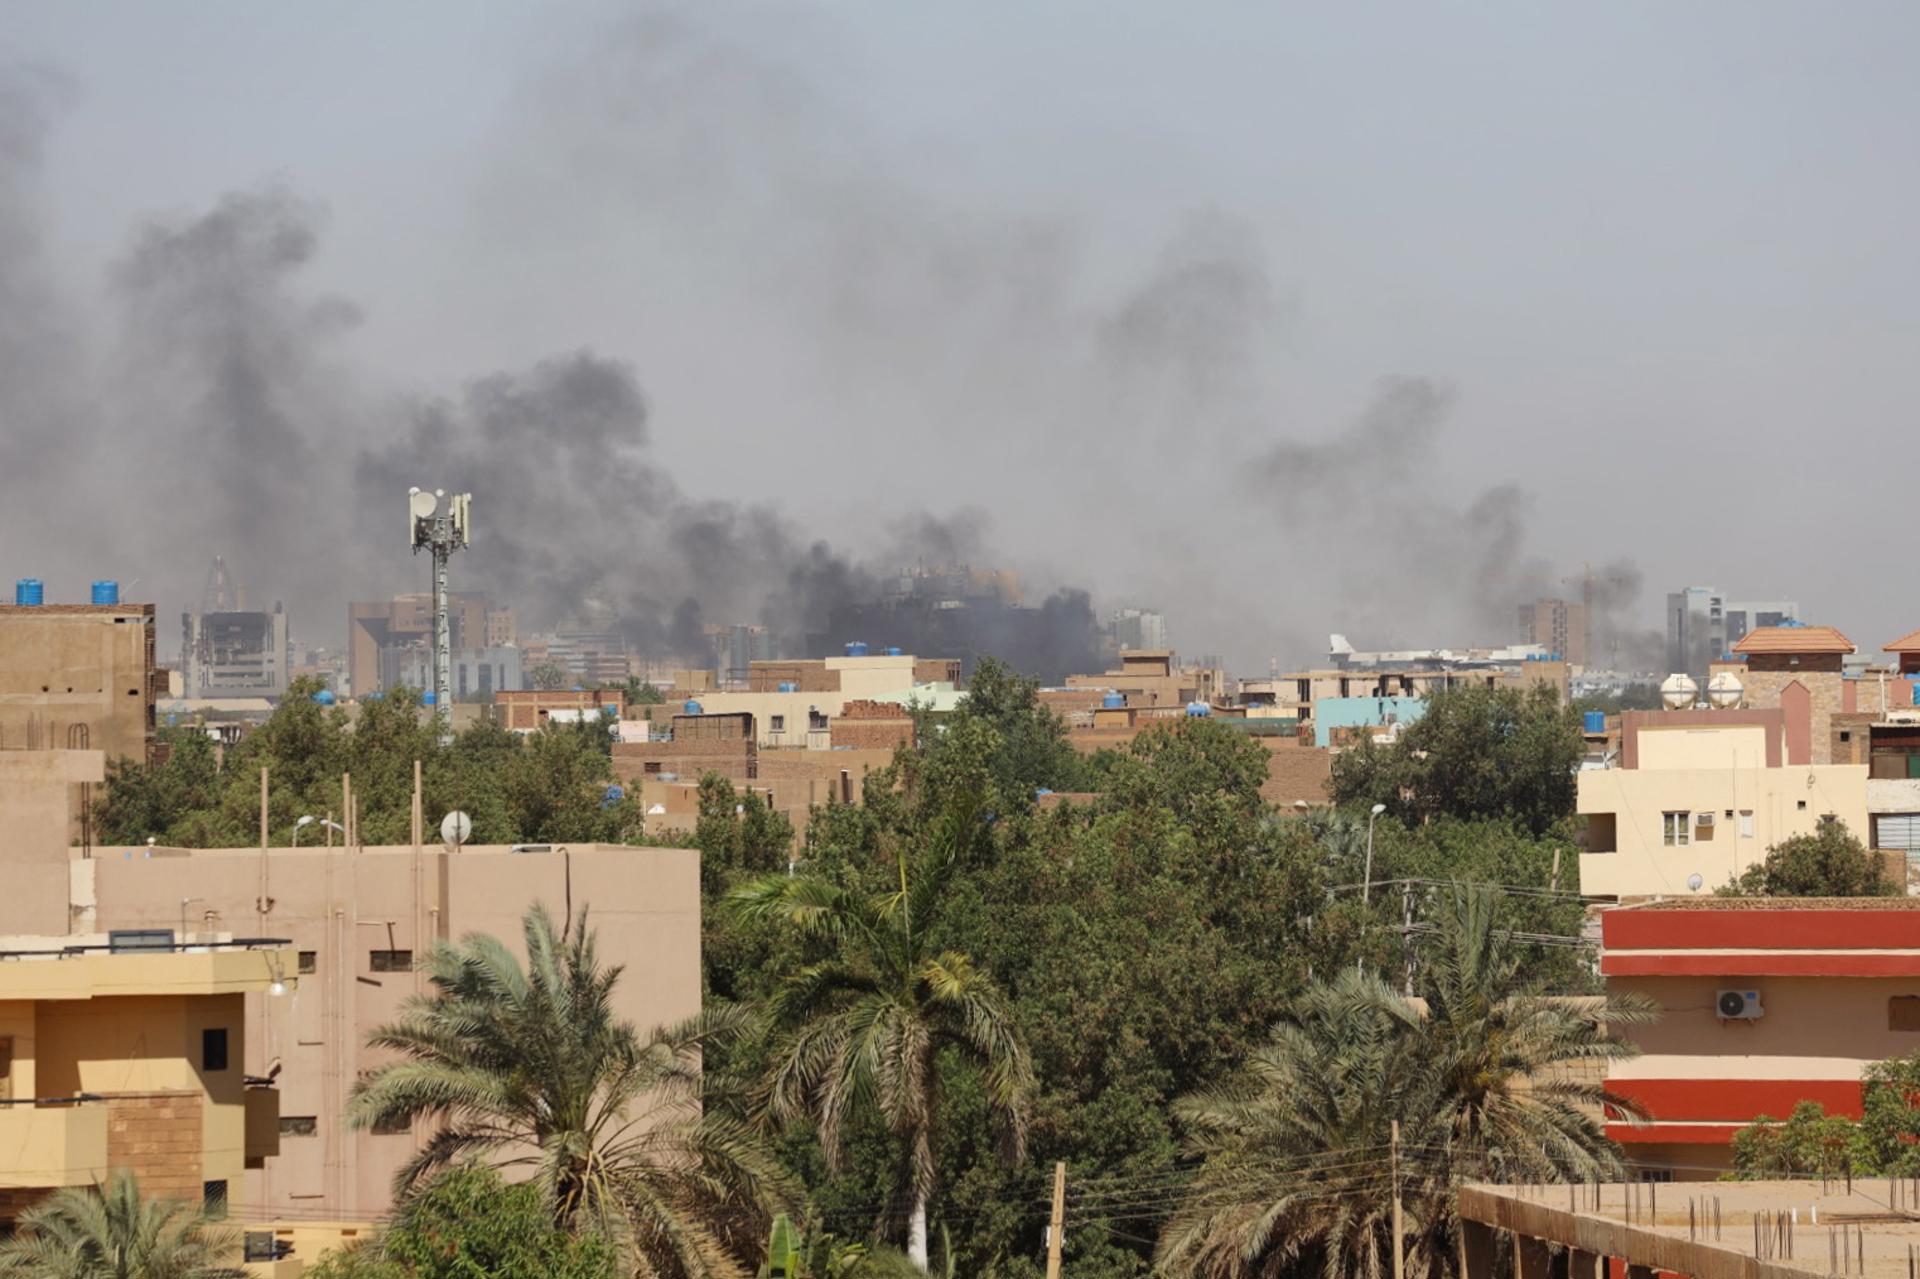 Smoke rises over the city during ongoing fighting between the Sudanese army and paramilitaries of the Rapid Support Forces (RSF) in Khartoum, Sudan, 19 April 2023. EPA-EFE/STRINGER